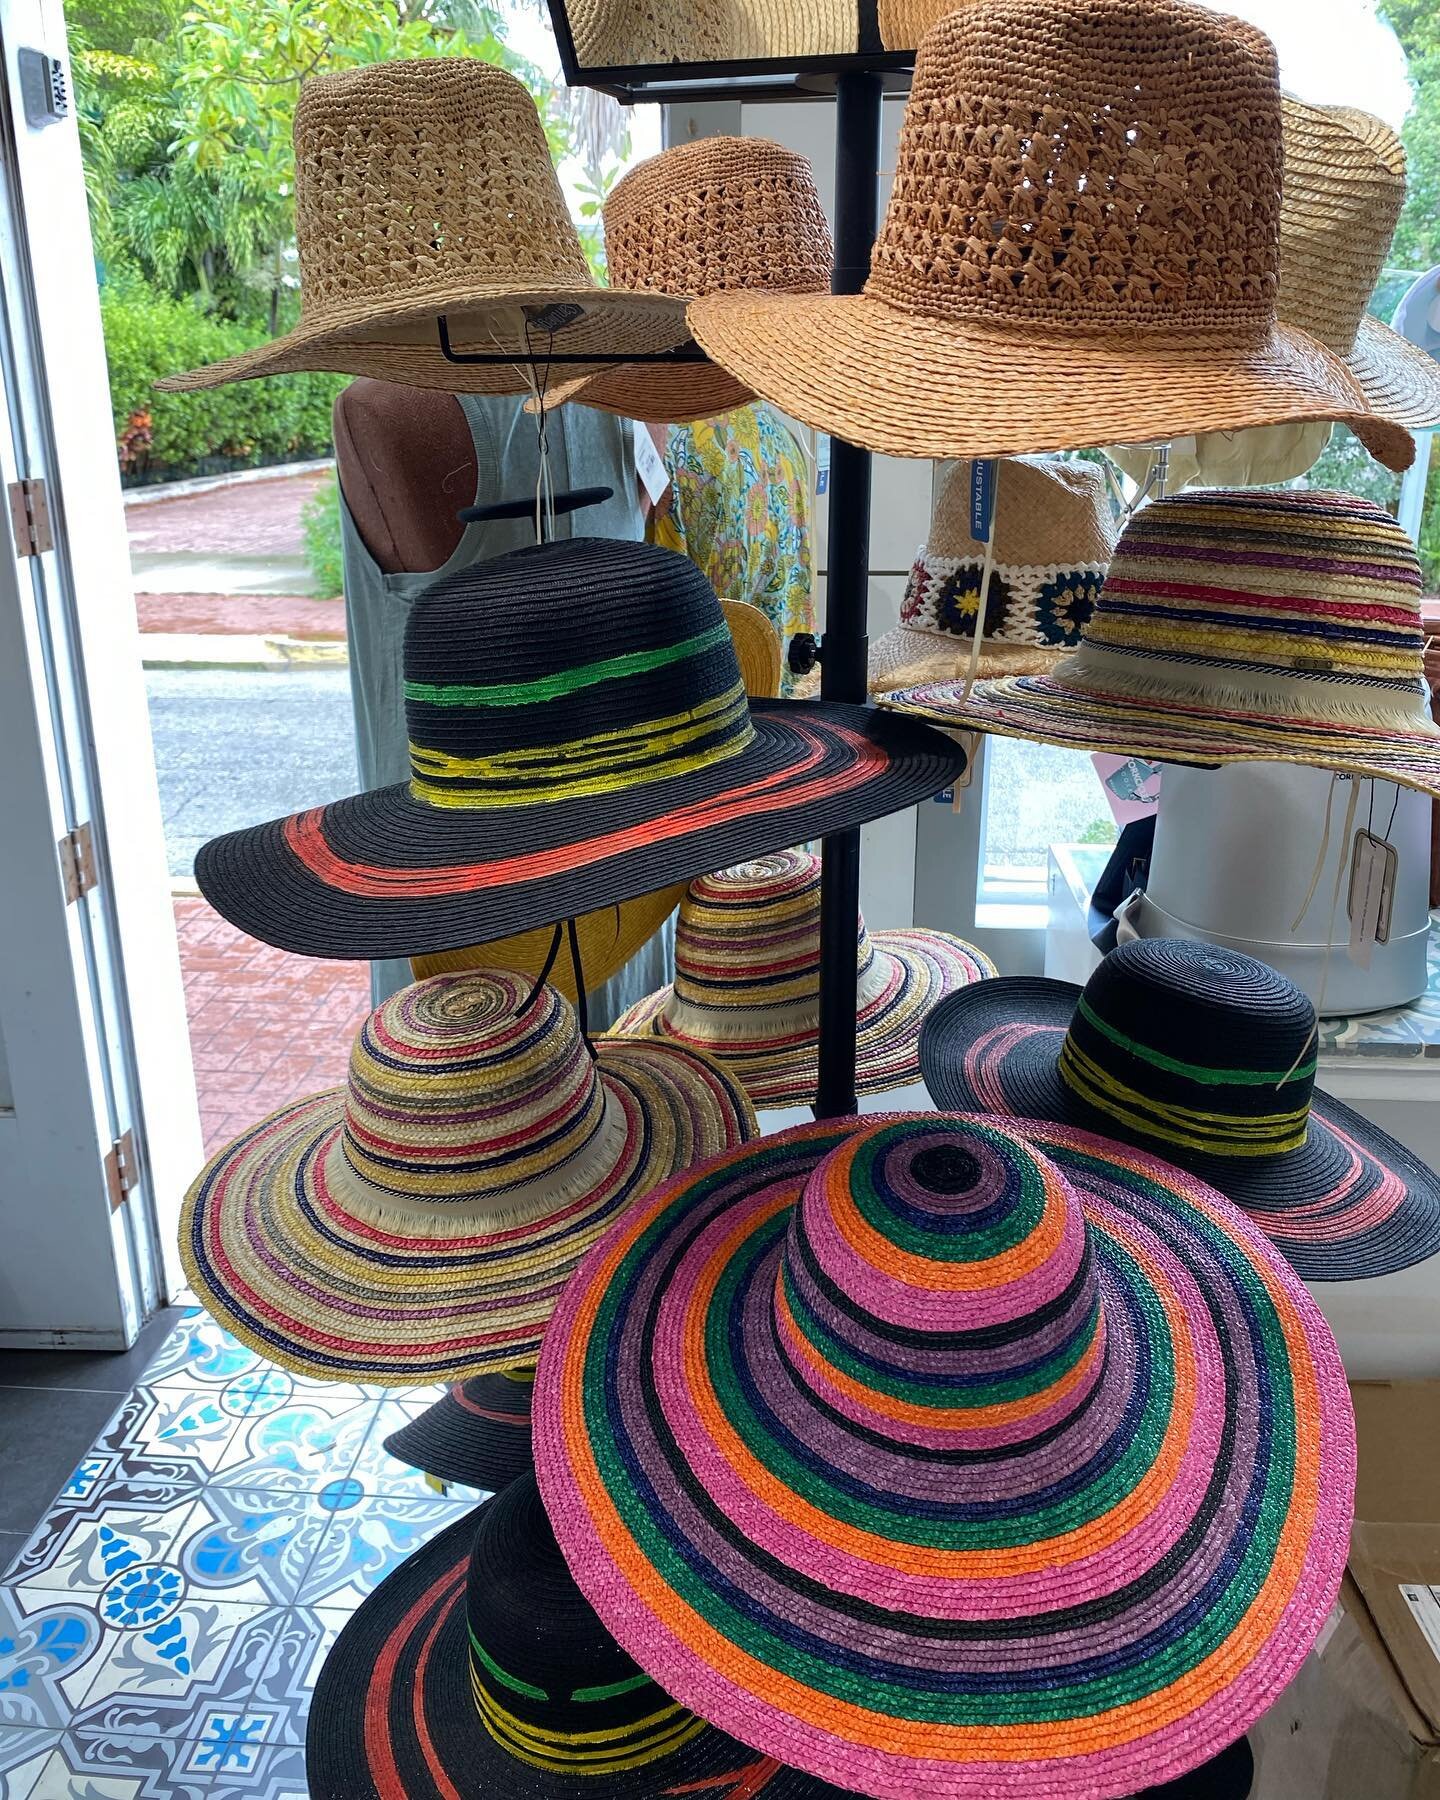 Wishing you a bright and sunshiny day from the Key West Sunshine Club ☀️ 

We have so many hats in sooo many styles right now. Pop in and try one on 👒